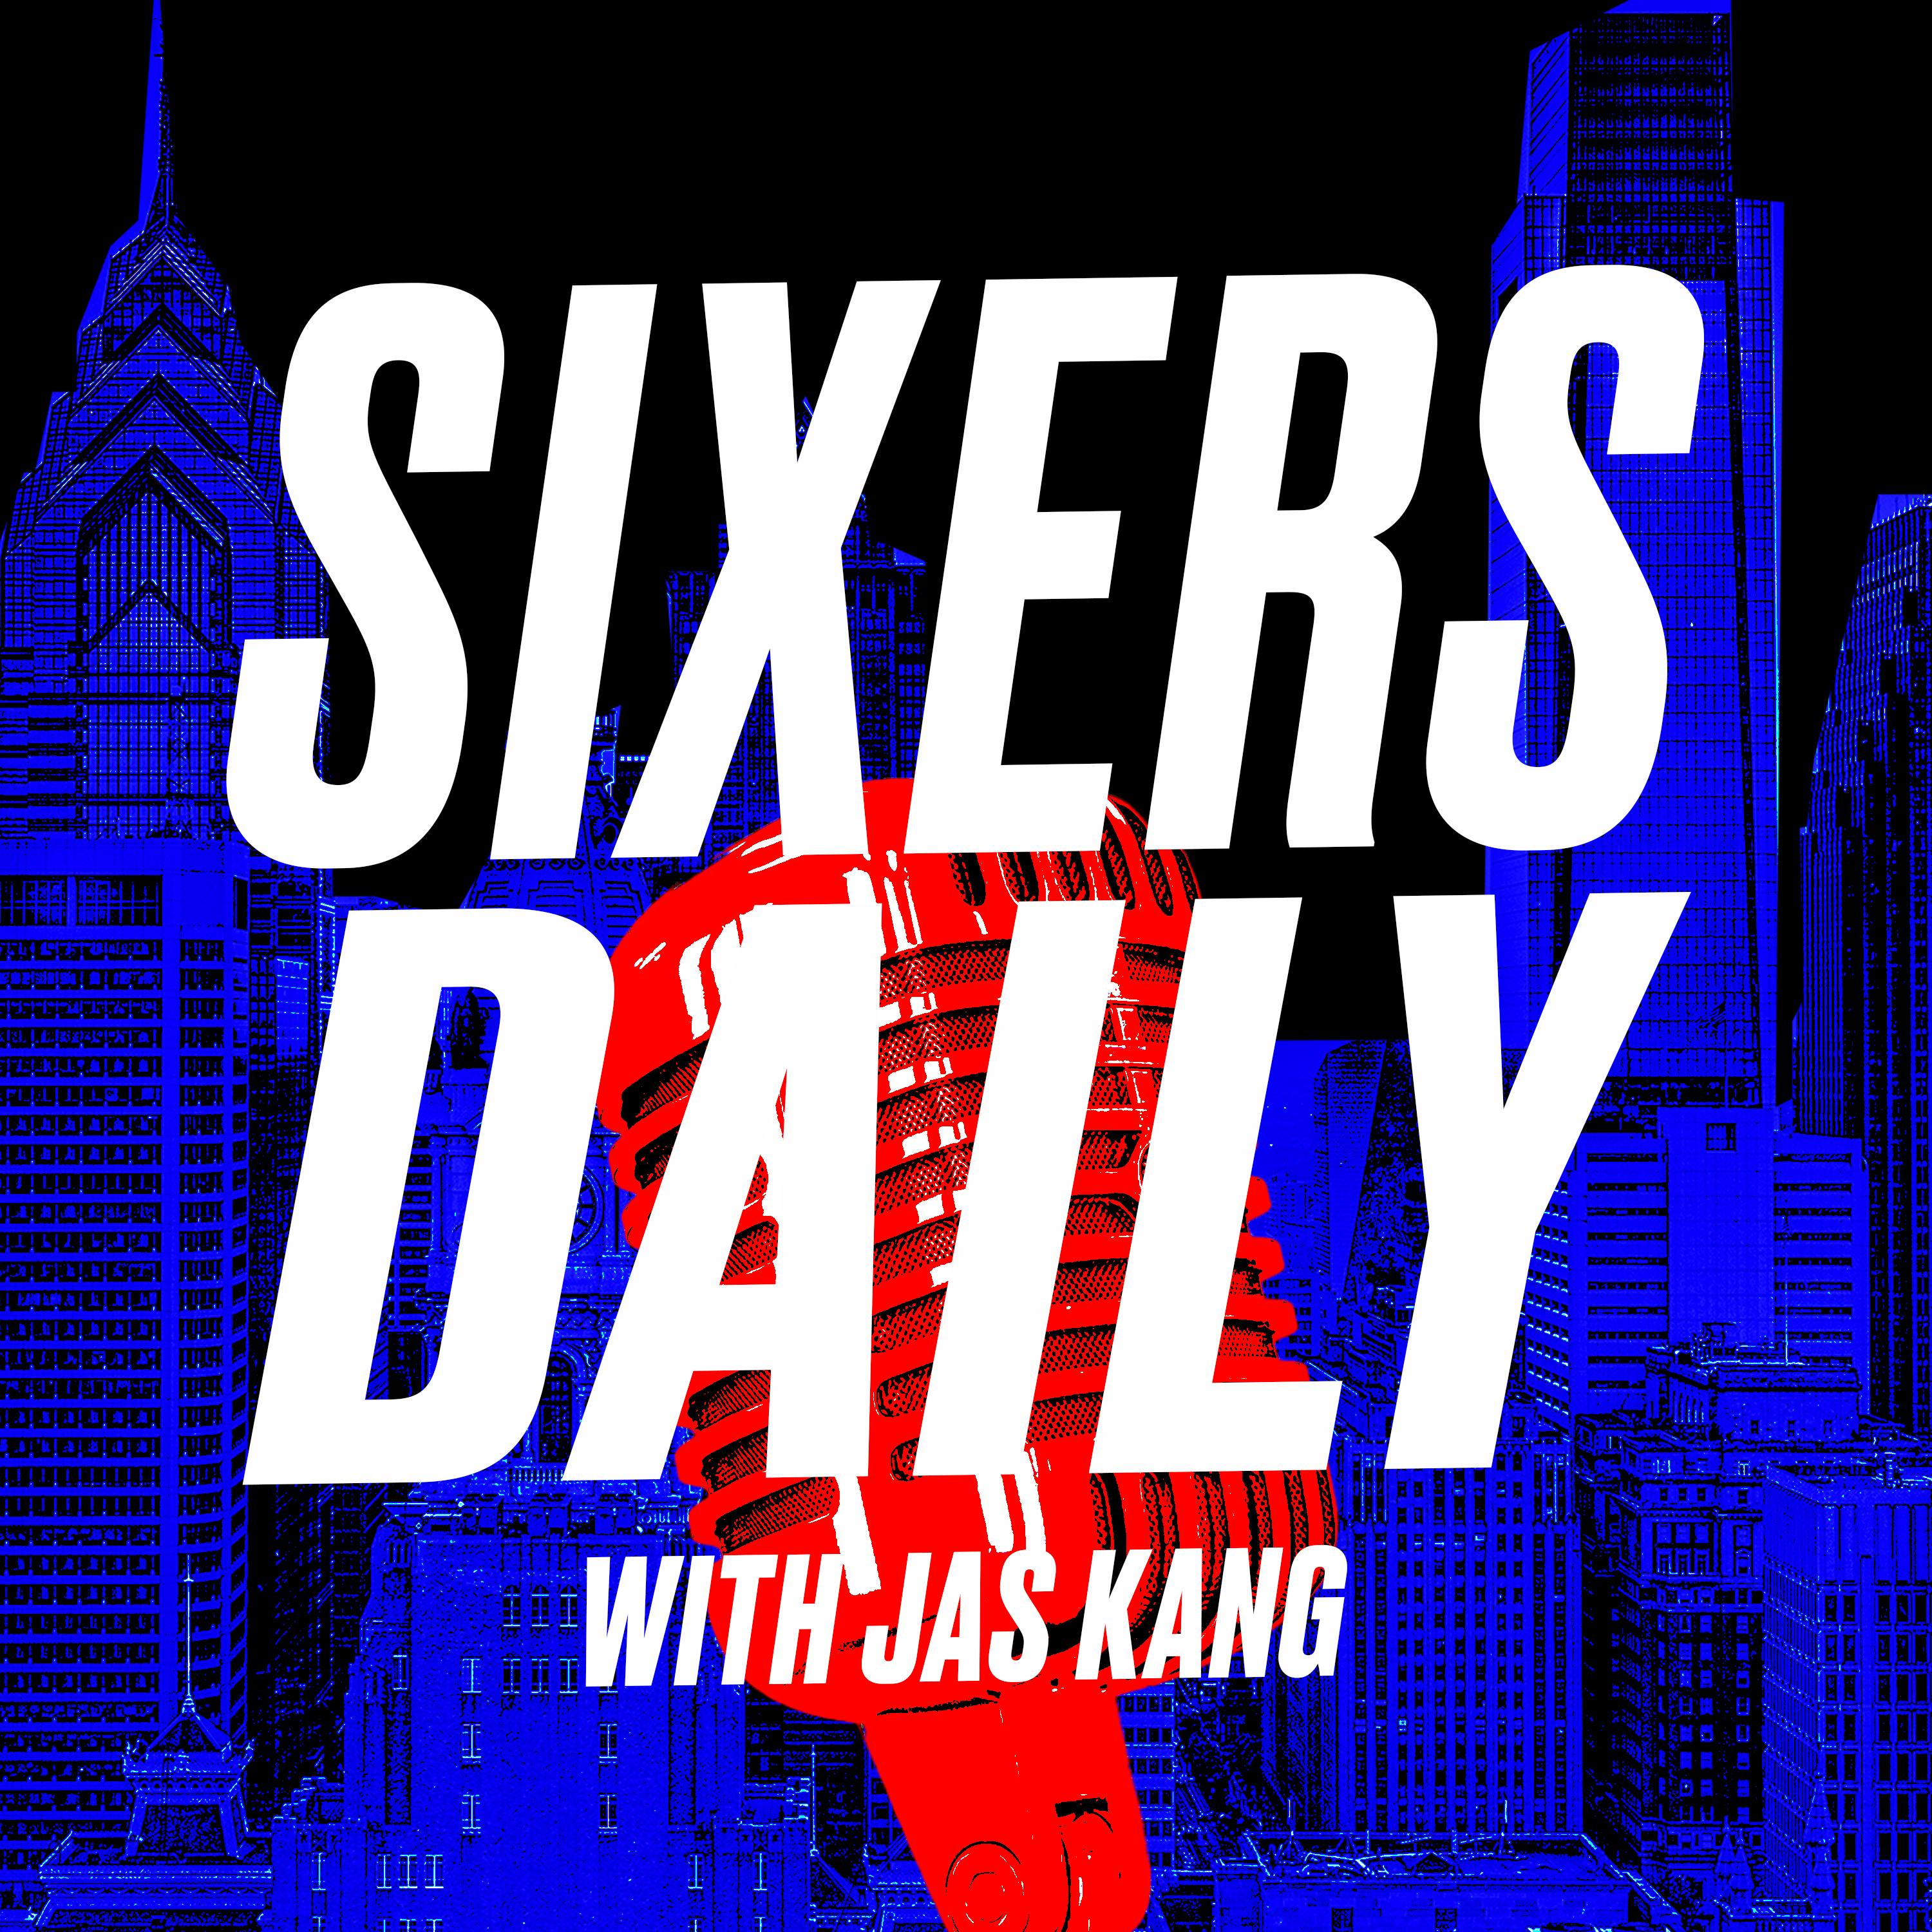 Sixers Daily with Jas Kang - James Harden still hasn't signed, Charles Bassey's chances, Markieef Morris as a target?, NBA trade talk and more with Paul Hudrick